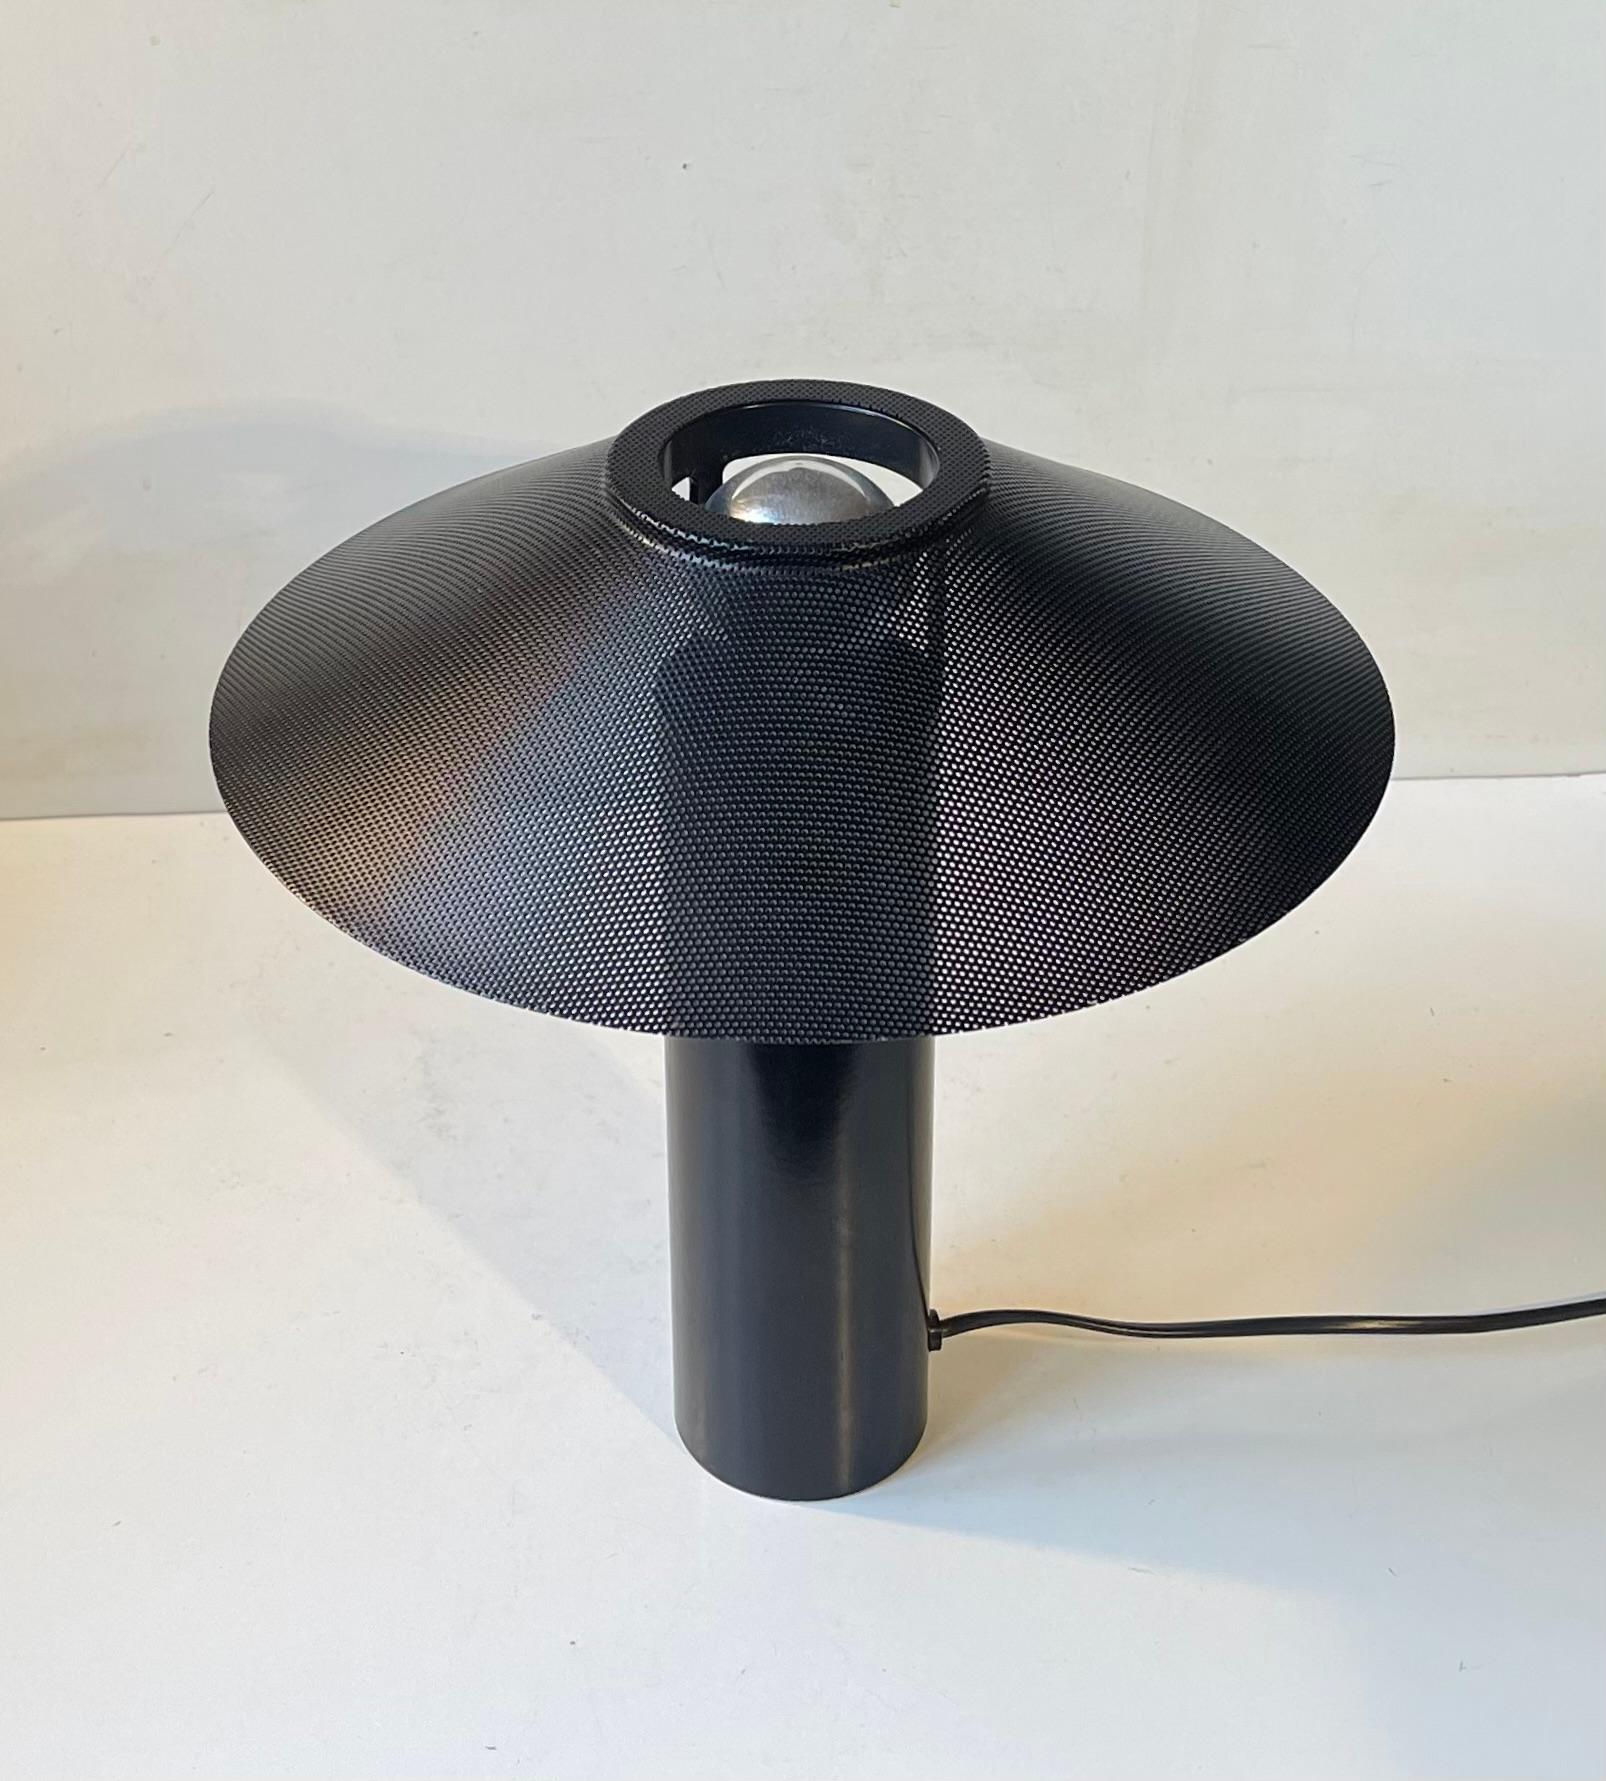 This rare Minimalistic modernist table lamp was designed by Hans Schwazer in the 1970s. It bears close resemblance to Joe Colombo's Riscio table lamp for SEM Luci. But this is all Danish and called 'Format' and it was manufactured by Royal